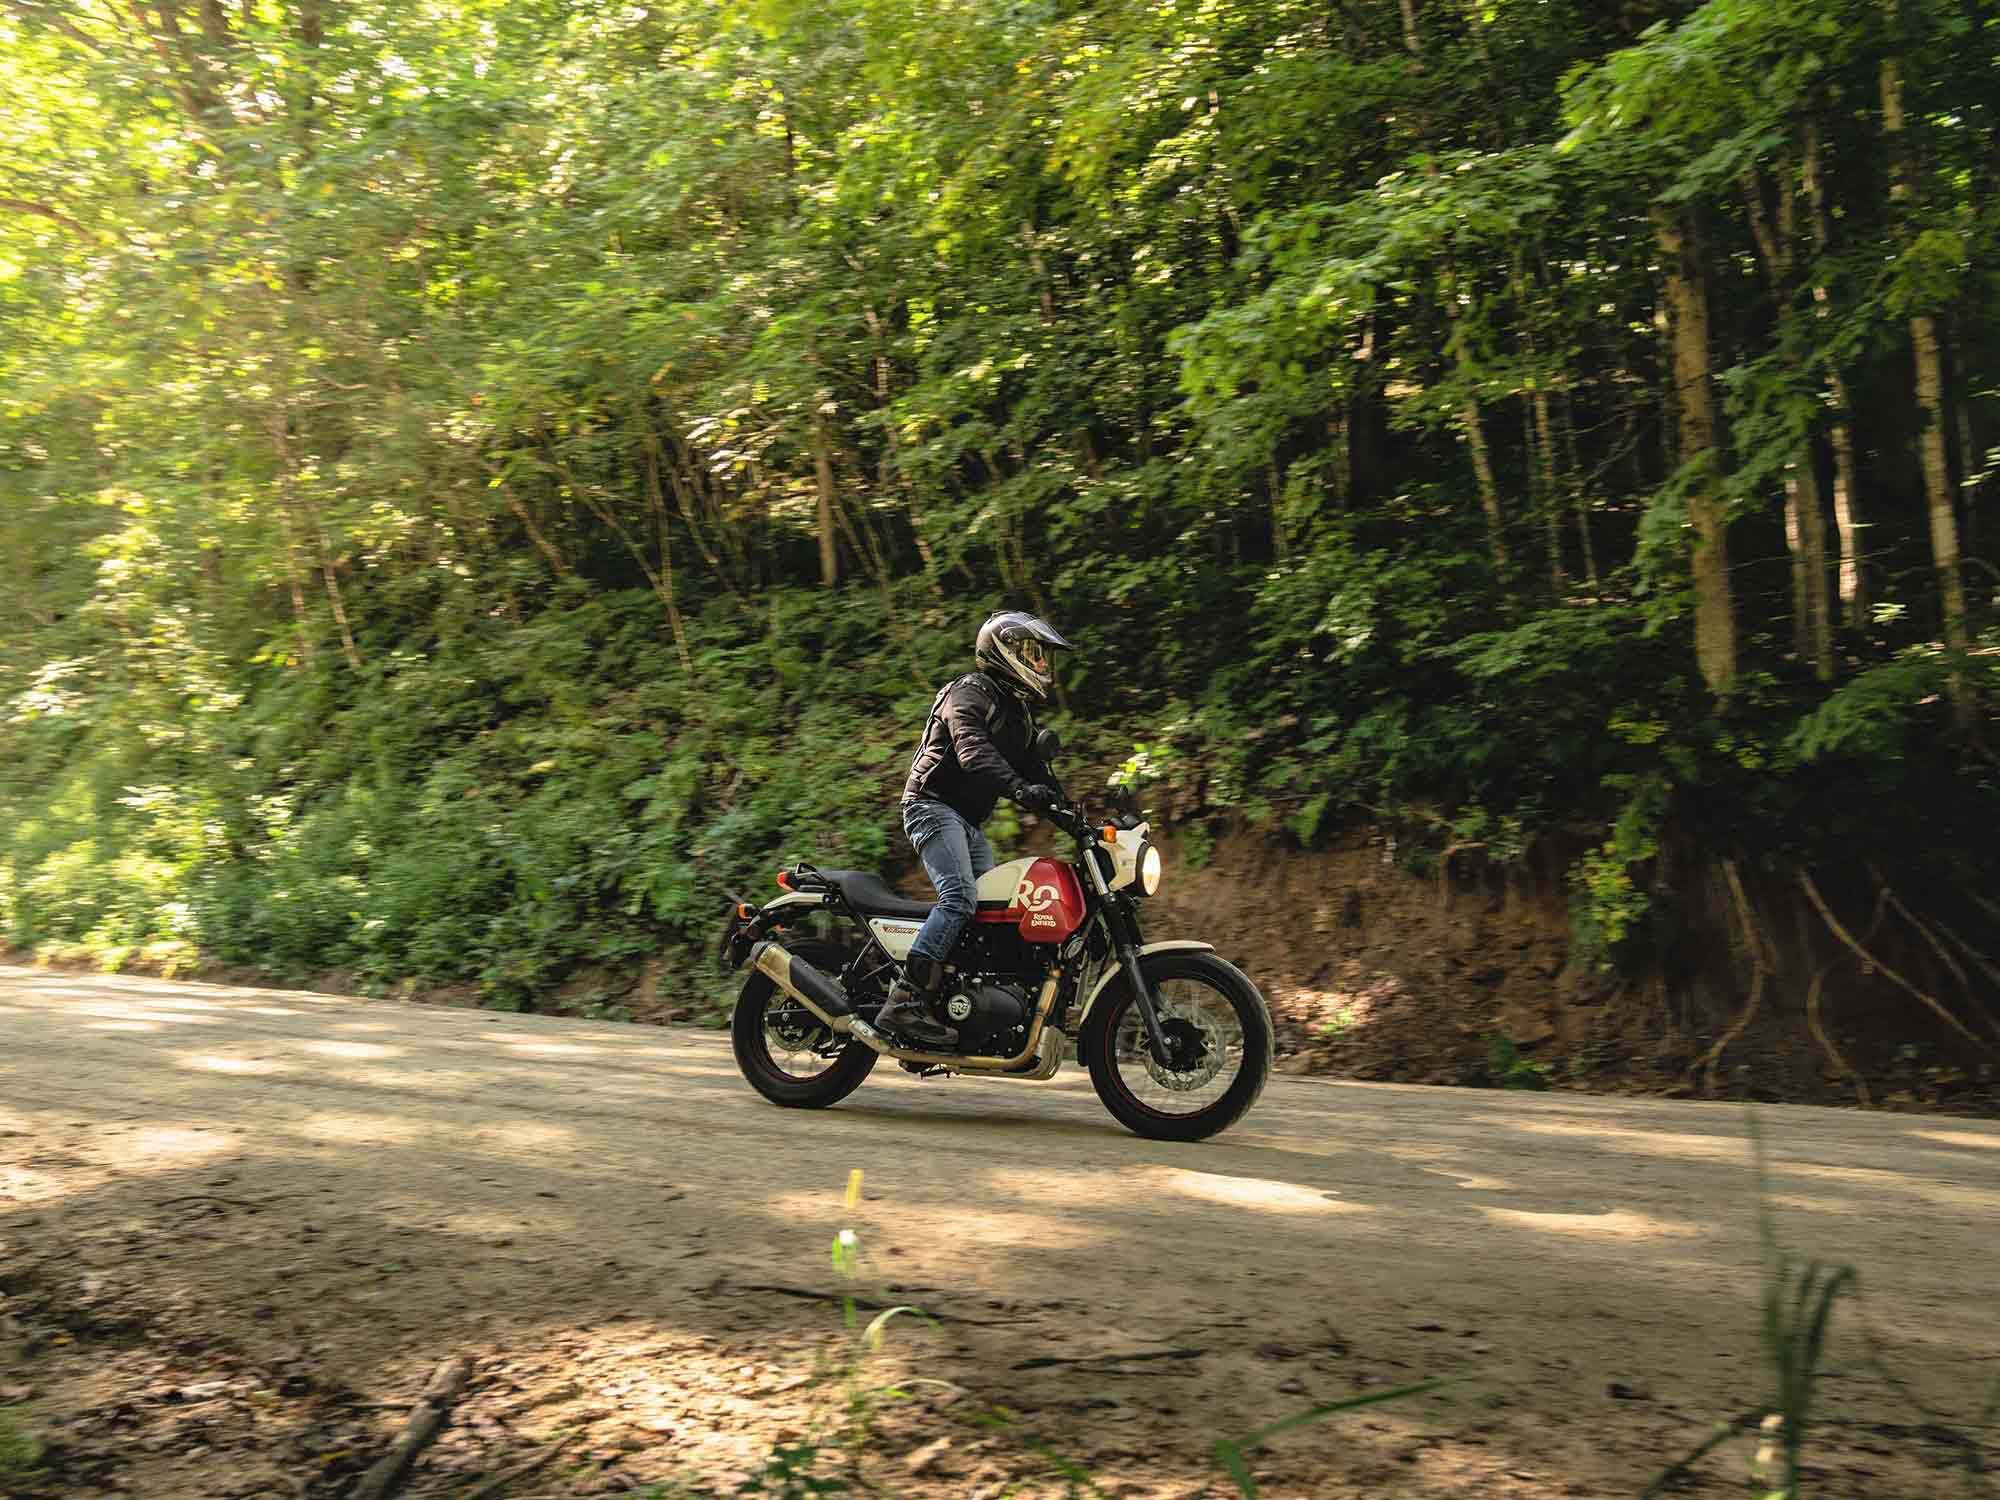 Minimal, rugged good looks and off-road capability make scrambler machines a still-popular choice for riders in 2022.